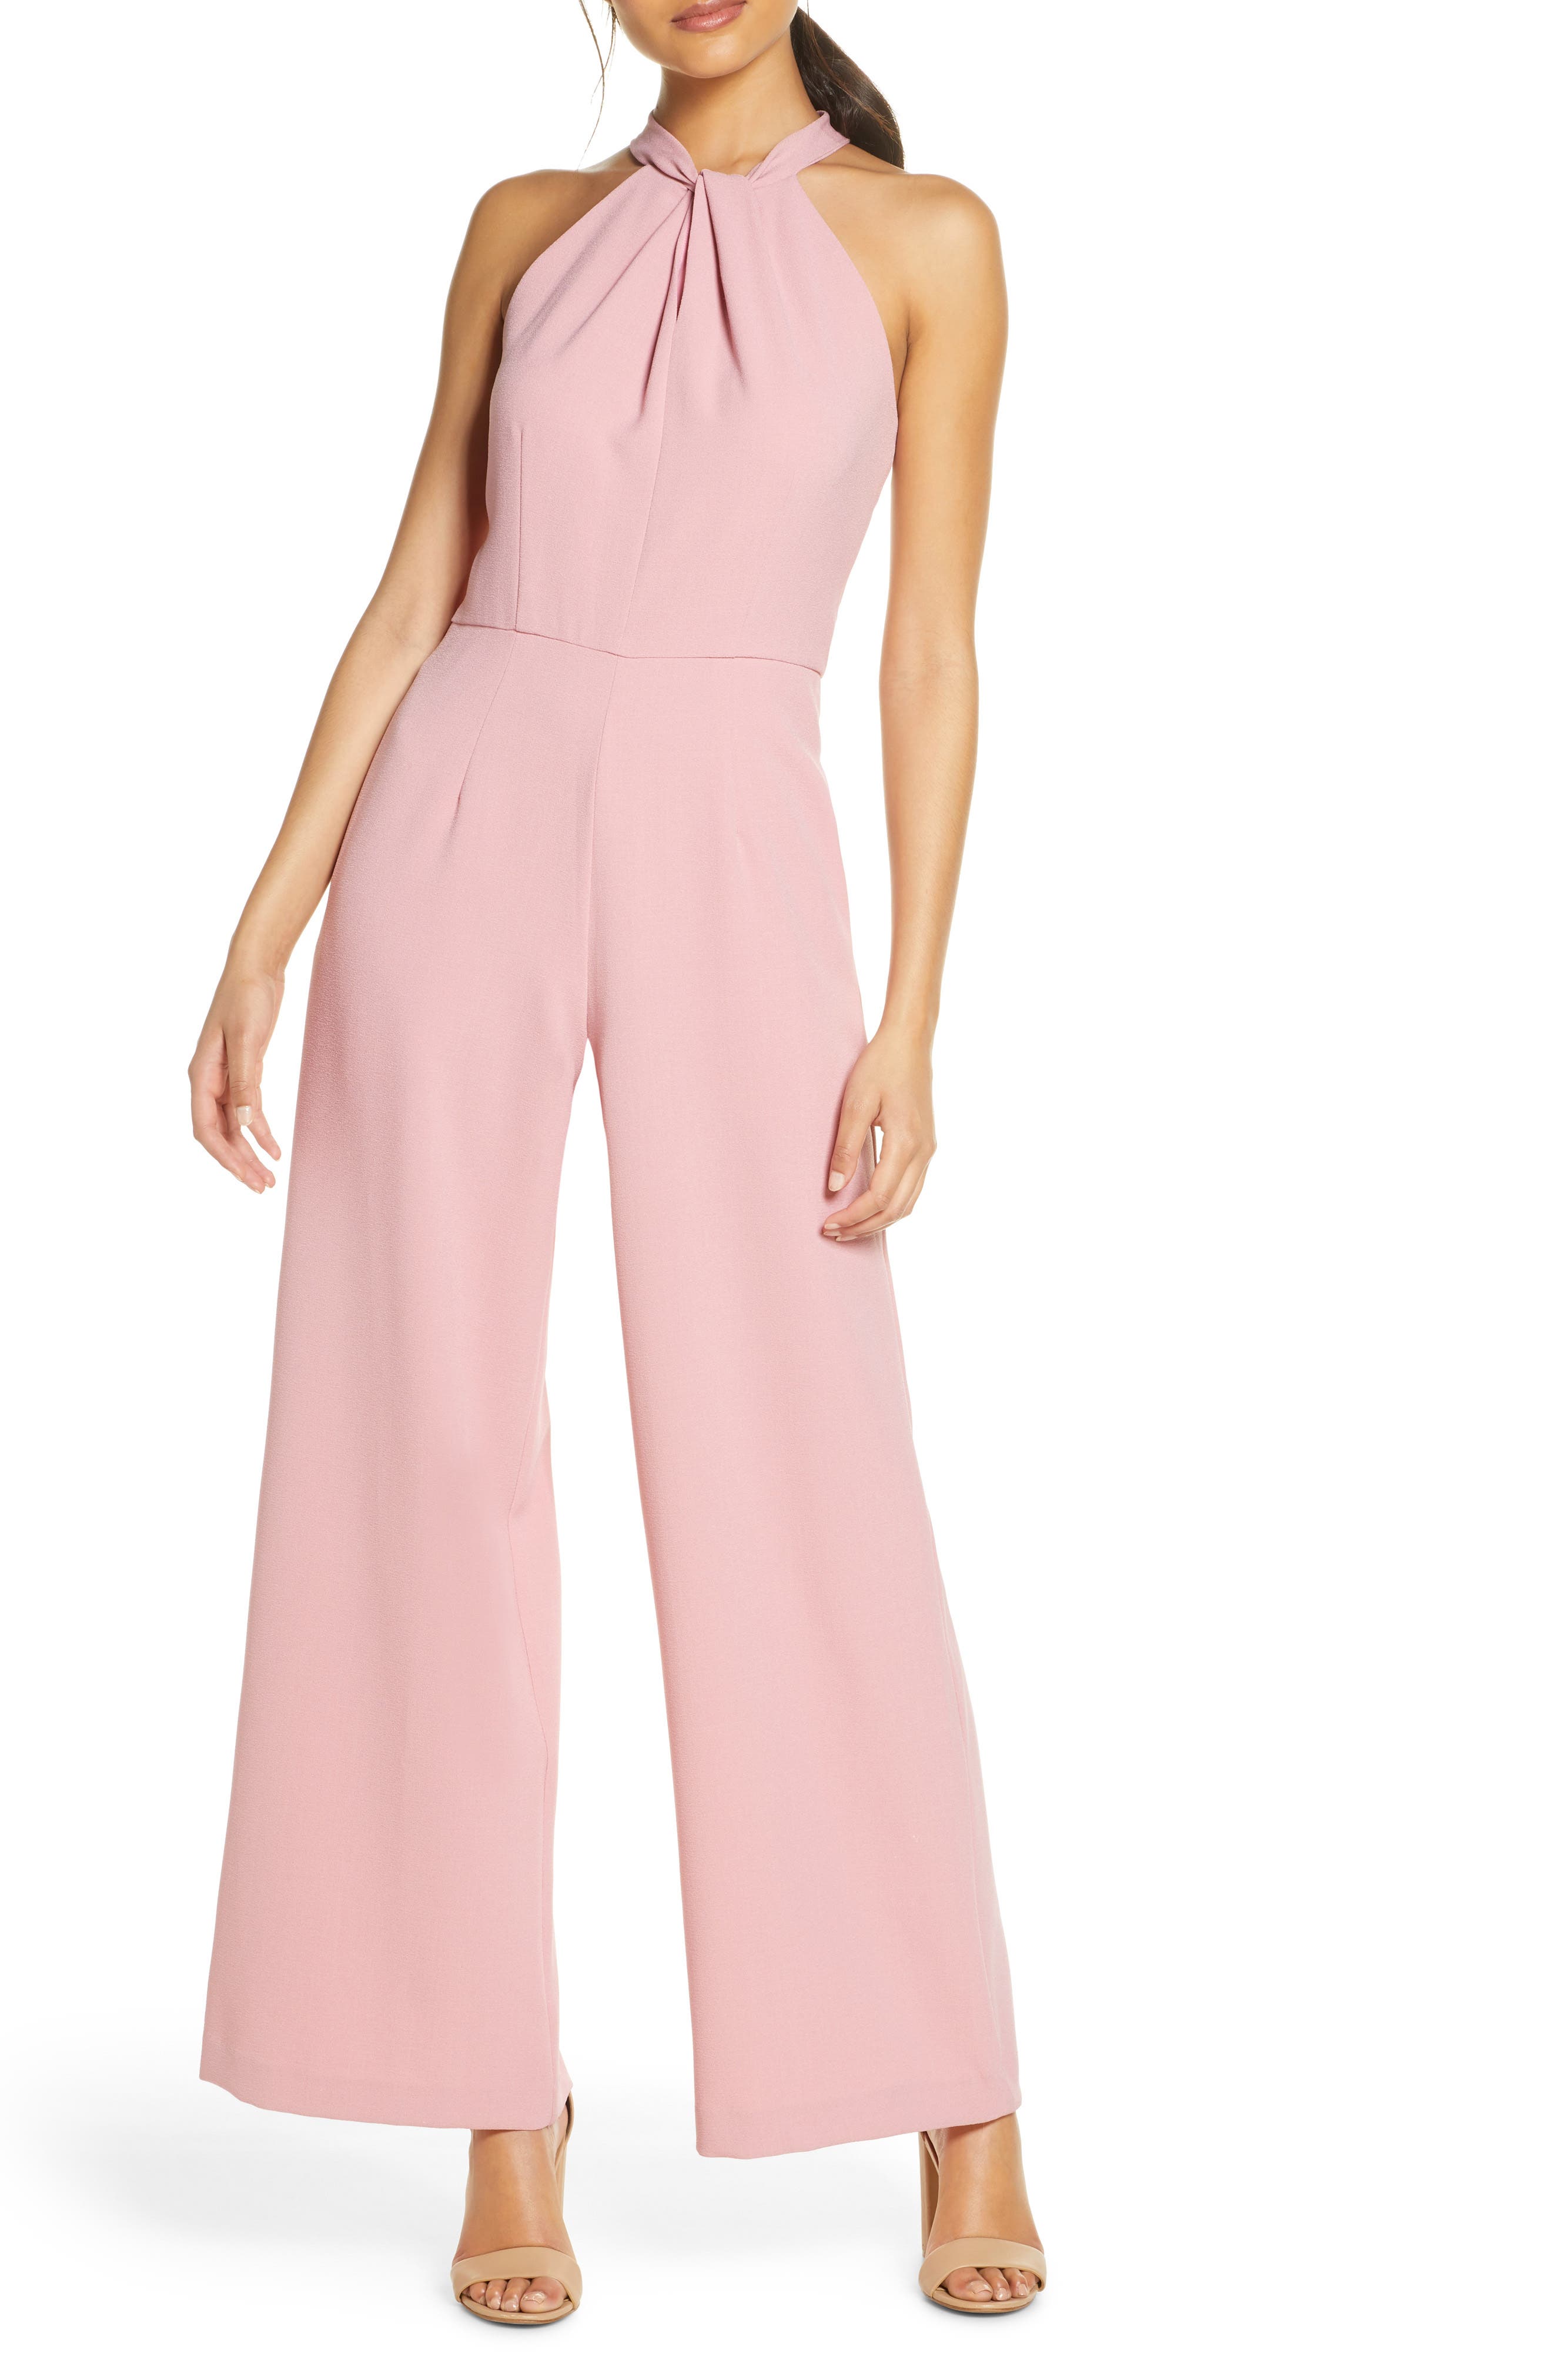 nordstrom pink gown